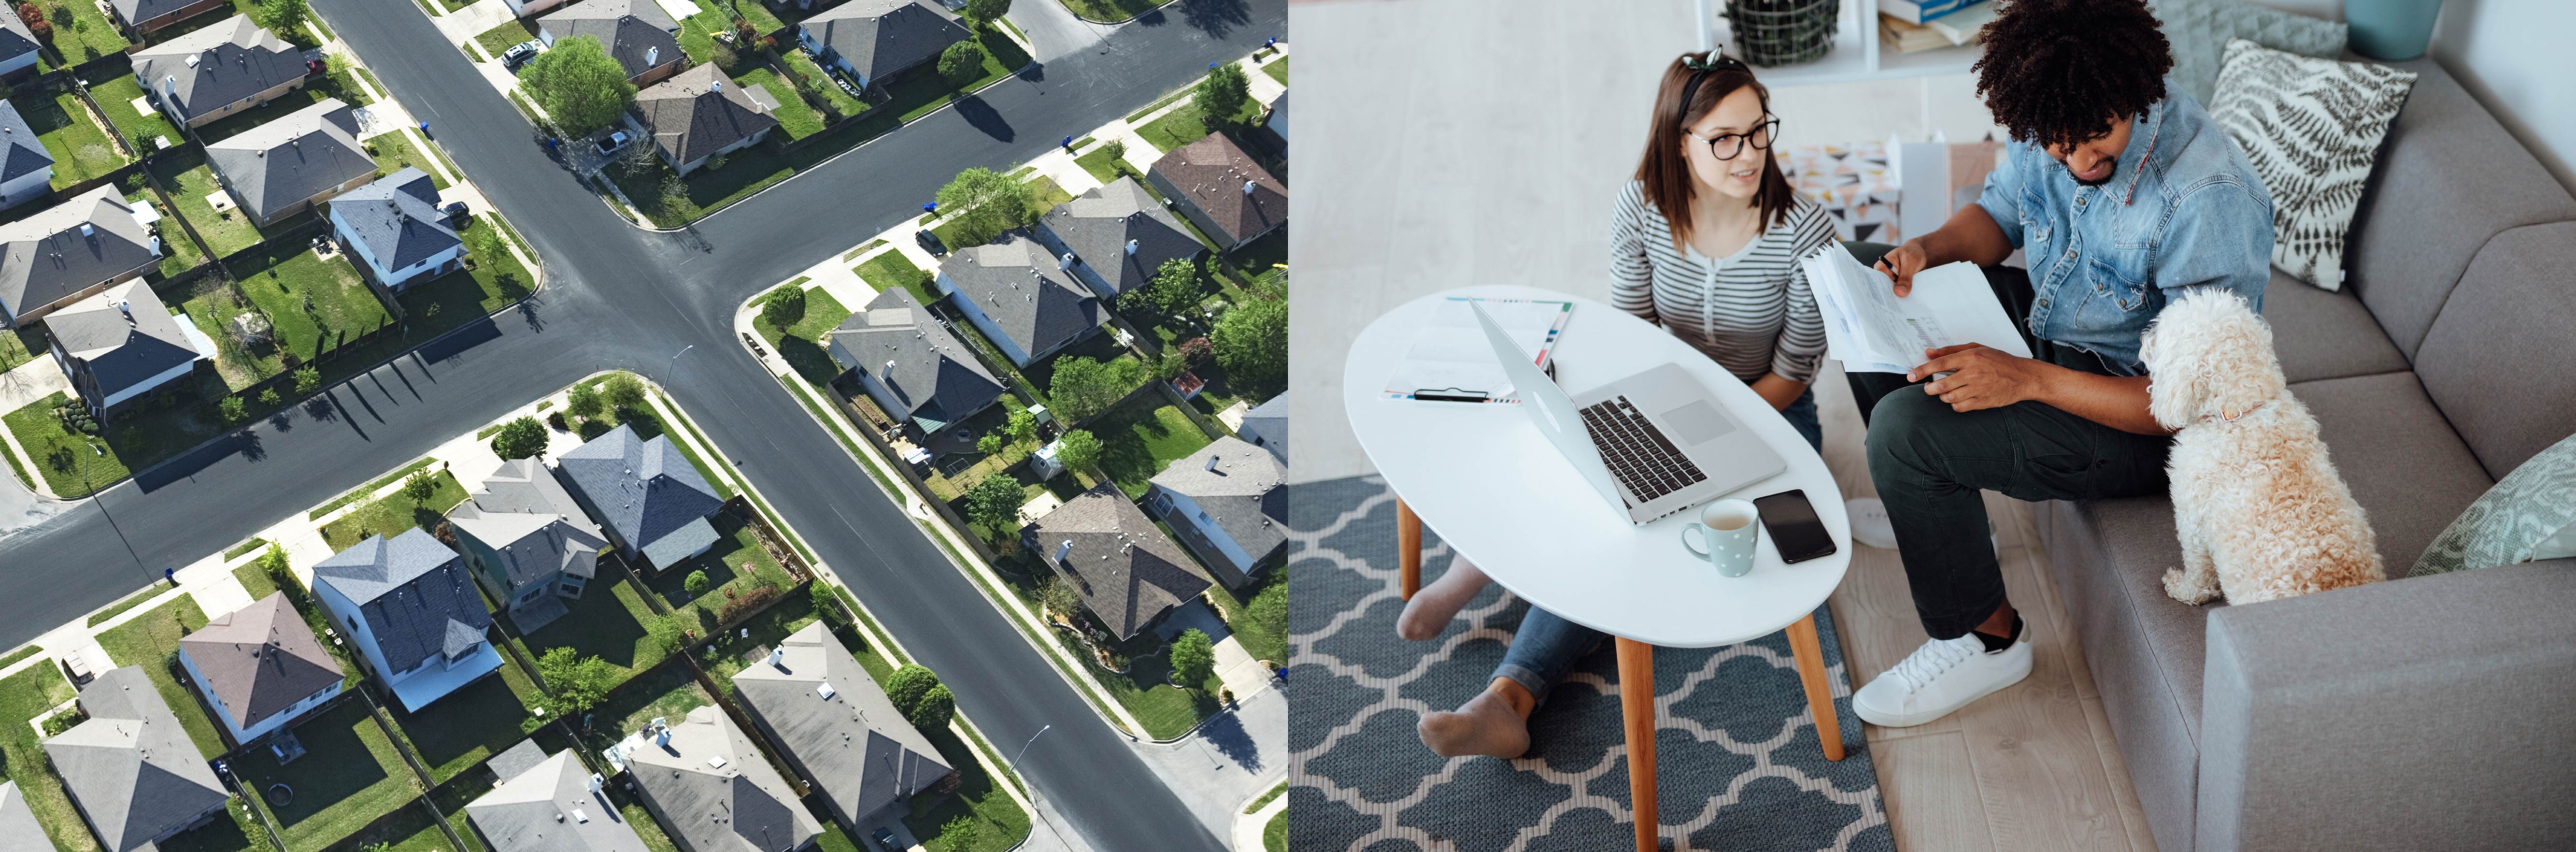 aerial view of large housing development showing homes, yards and street grid  |  smiling couple in their living room with laptop computer and their pet dog on sofa